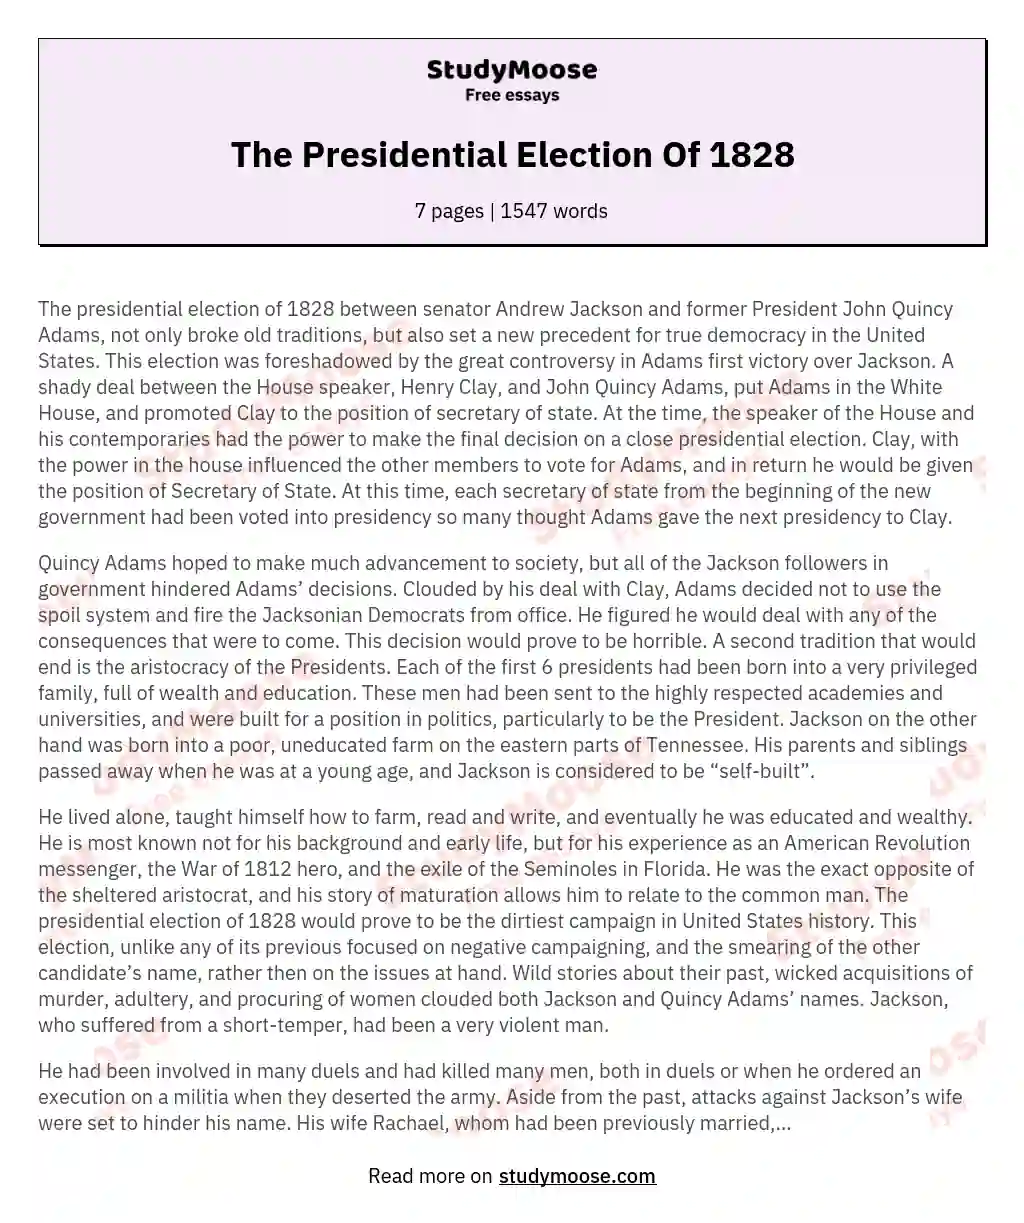 The Presidential Election Of 1828 essay